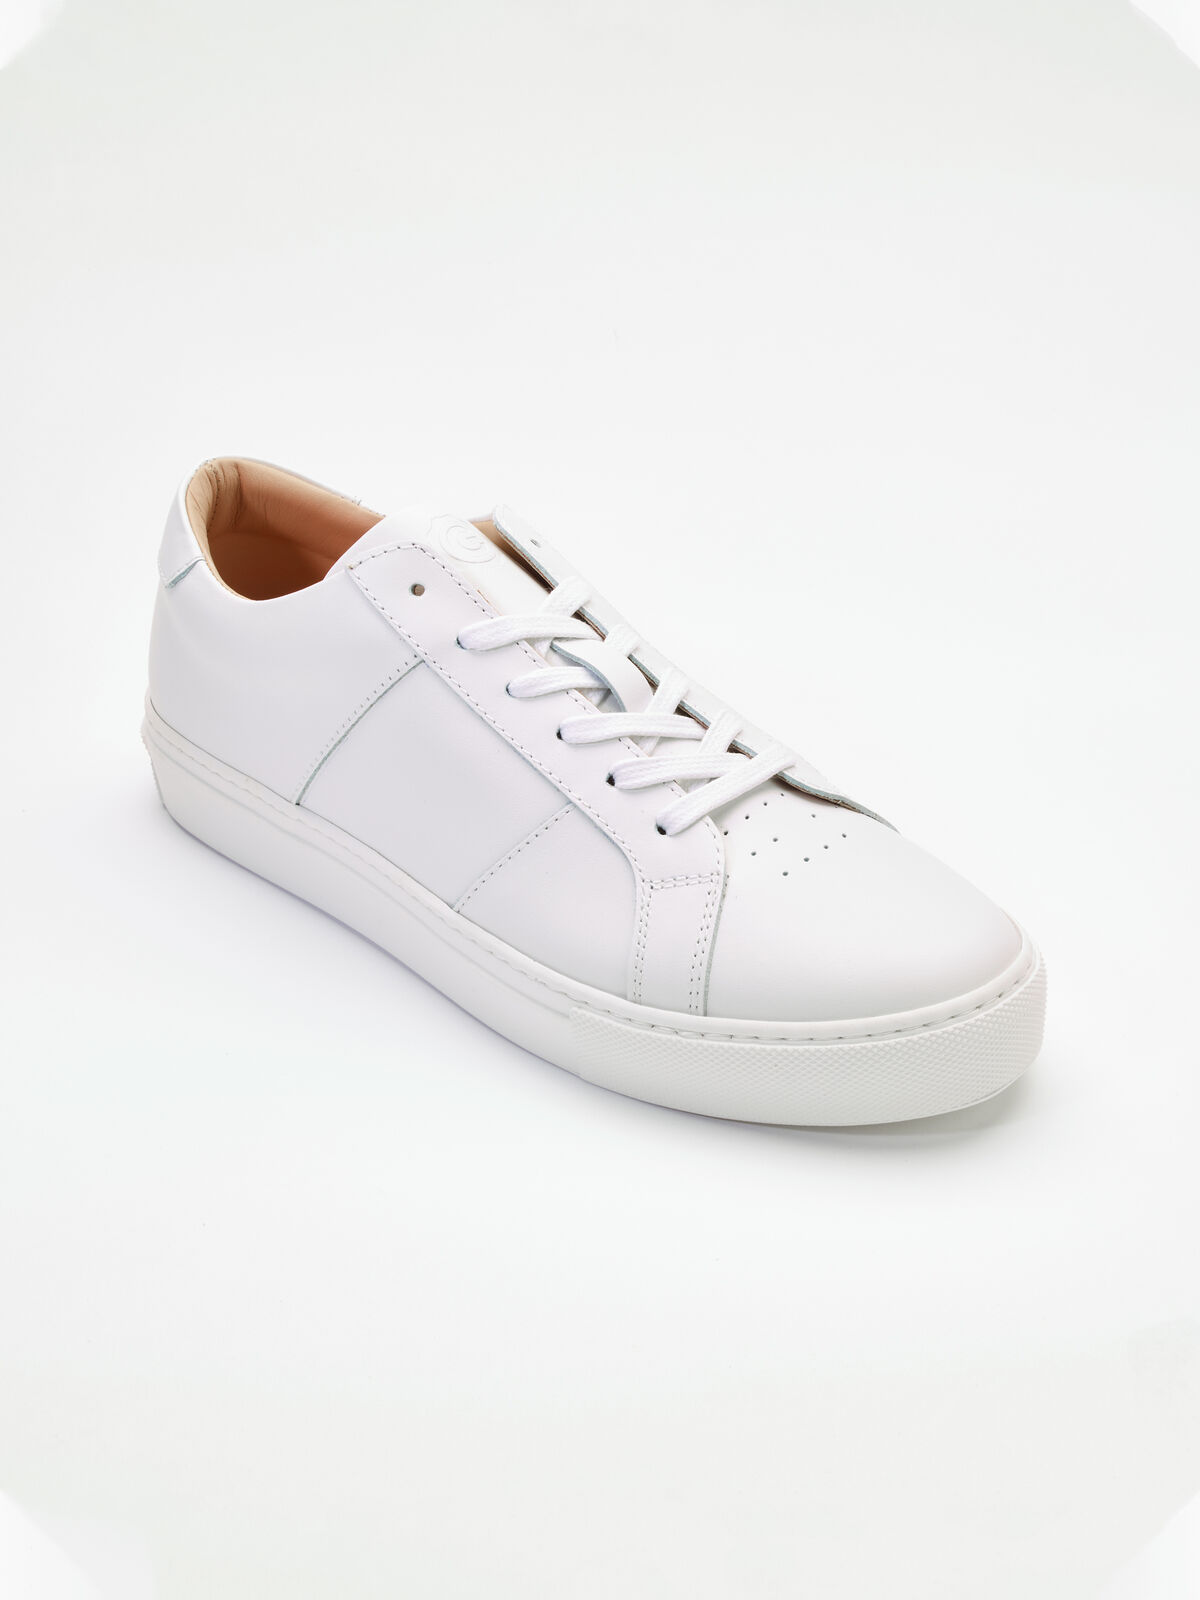 Greats Royale Leather Sneaker